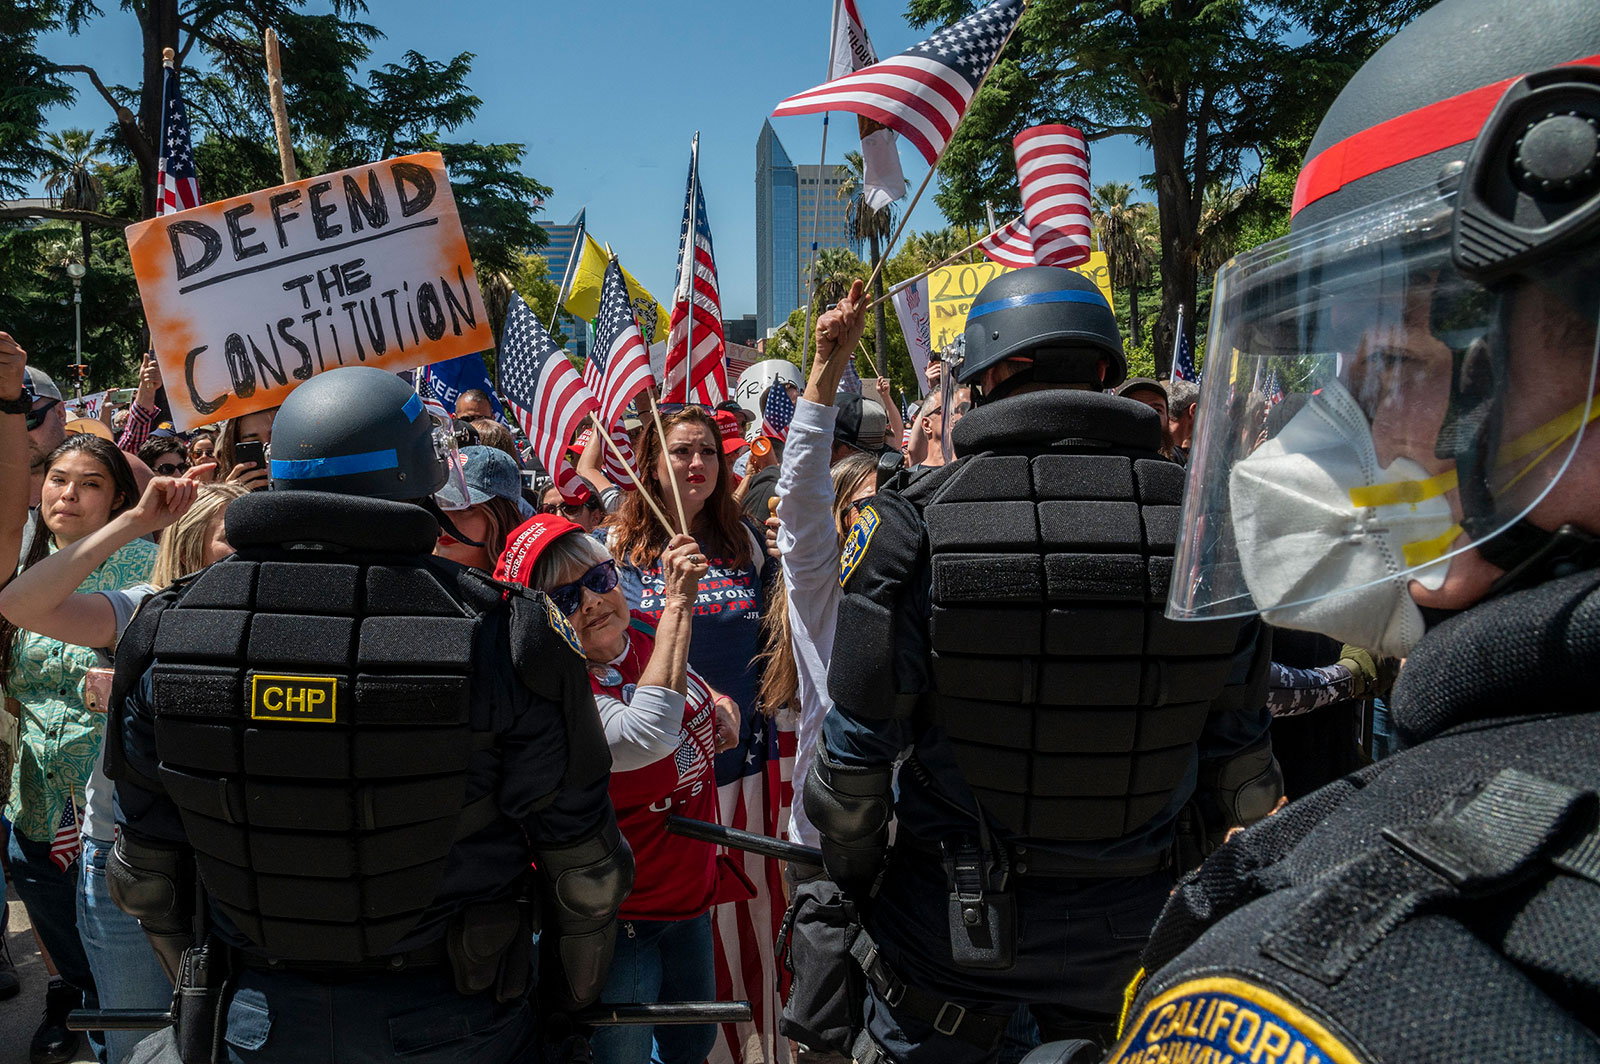 More than 30 people were arrested on Friday, May 1, 2020, during a demonstration at the California Capitol Building.